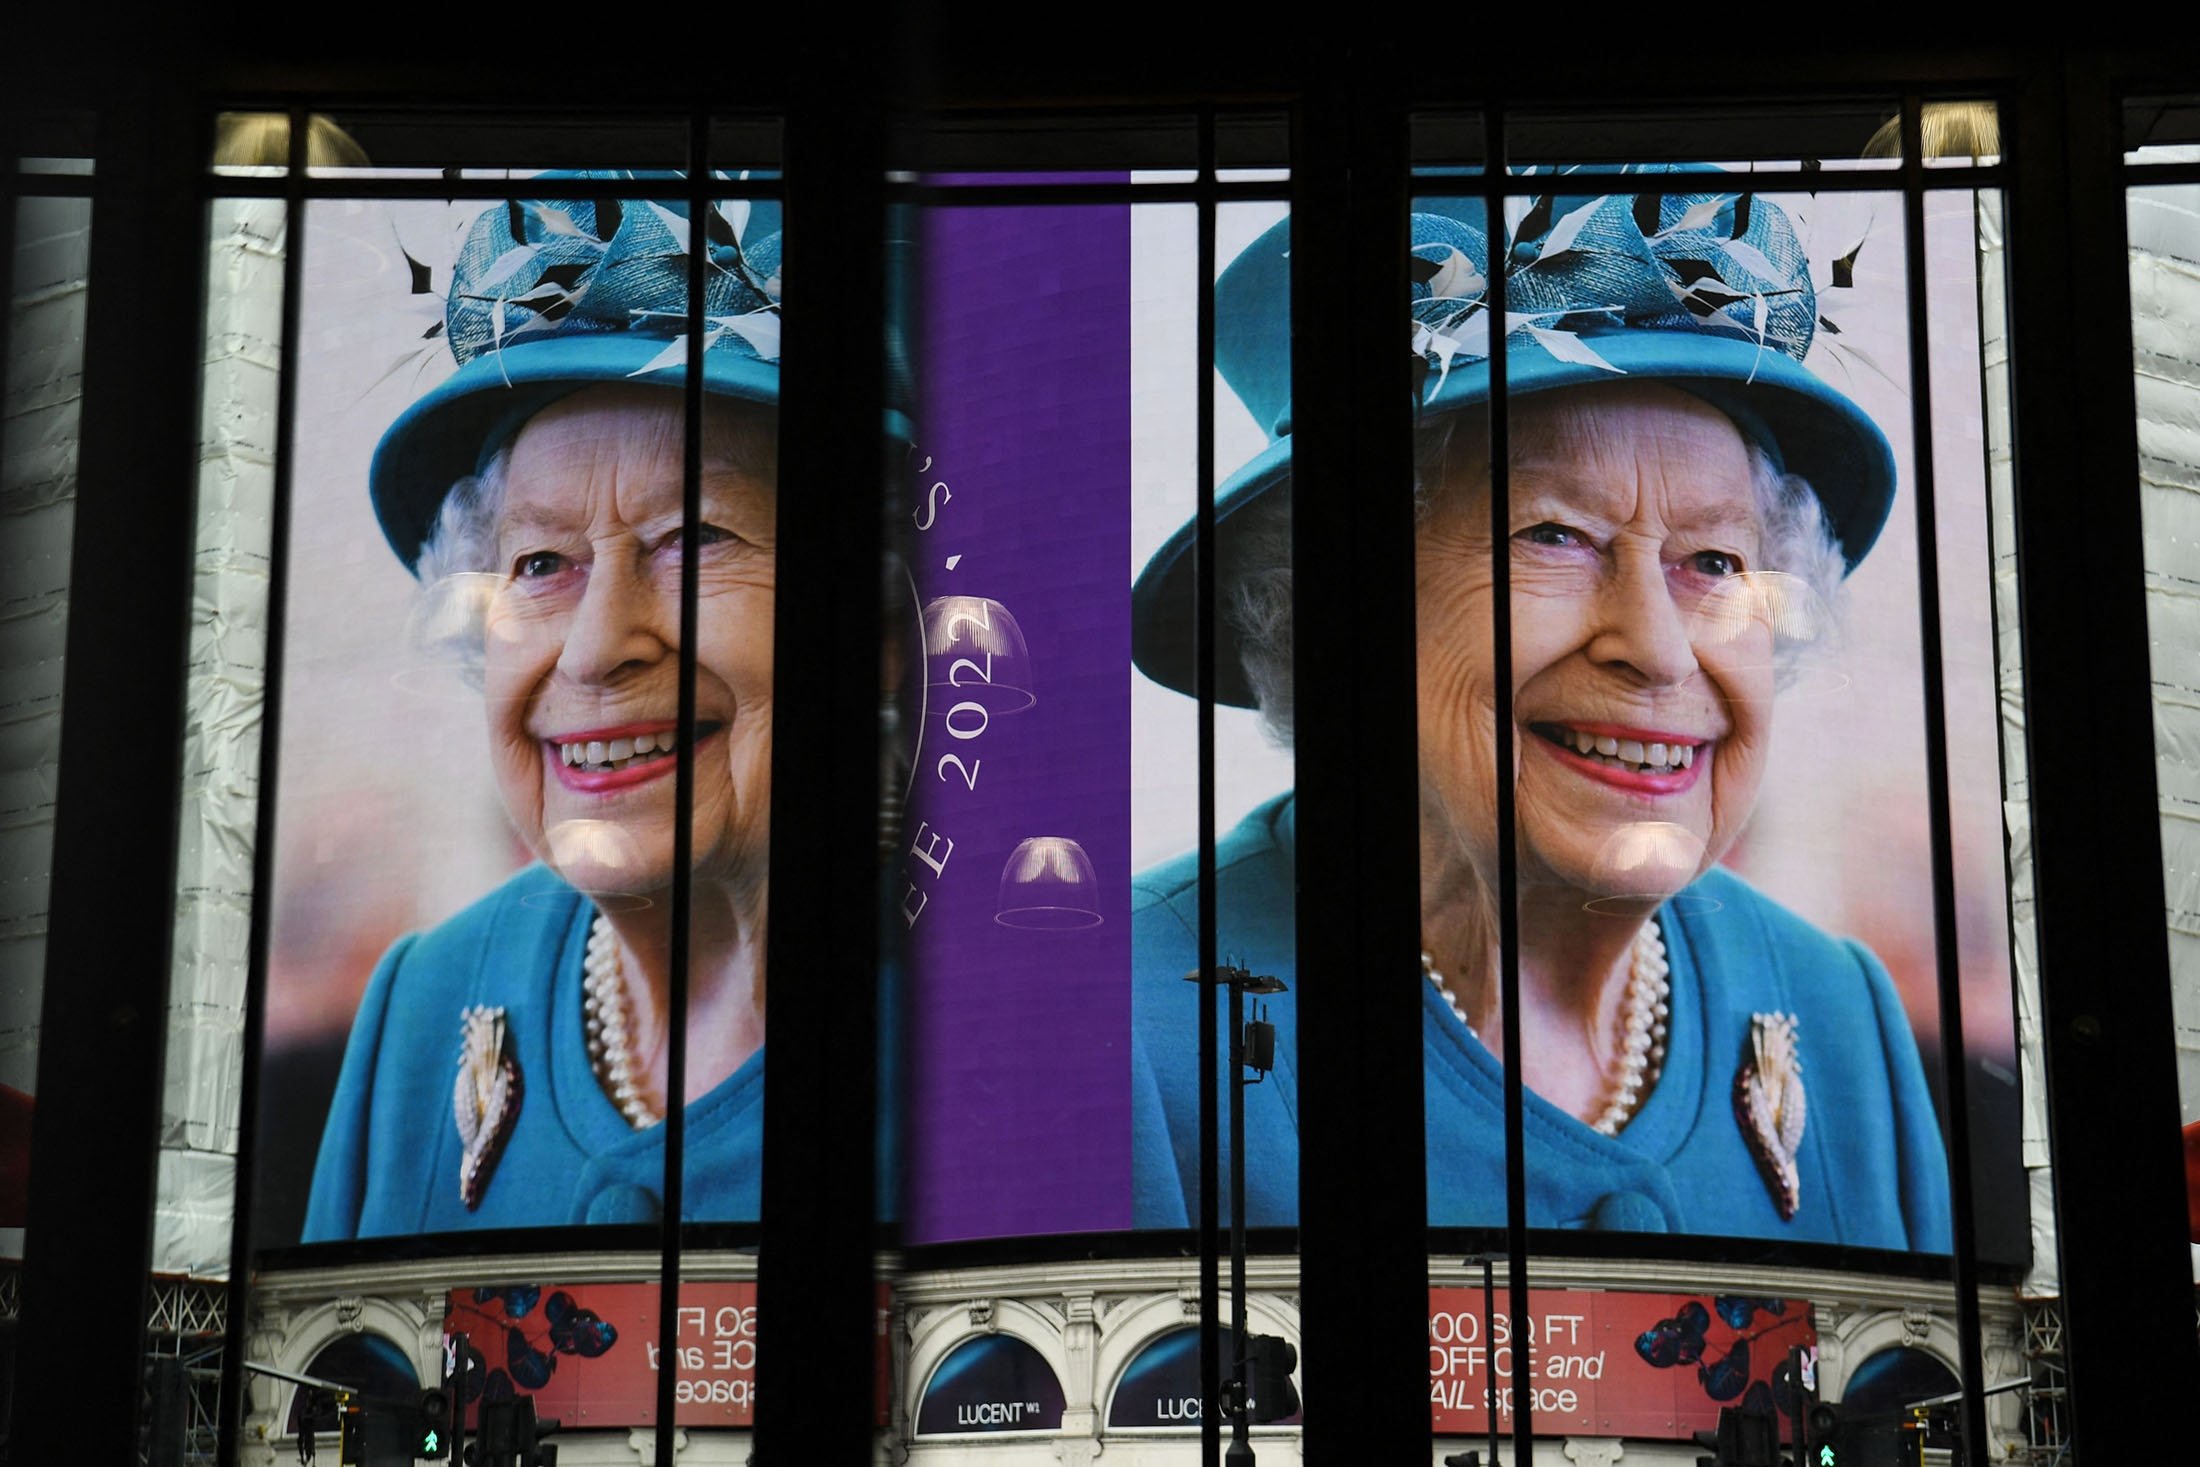 Images of Queen Elizabeth II are displayed on the big digital screens at Piccadilly Circus in central London, U.K., Feb. 6, 2022. (AFP Photo)